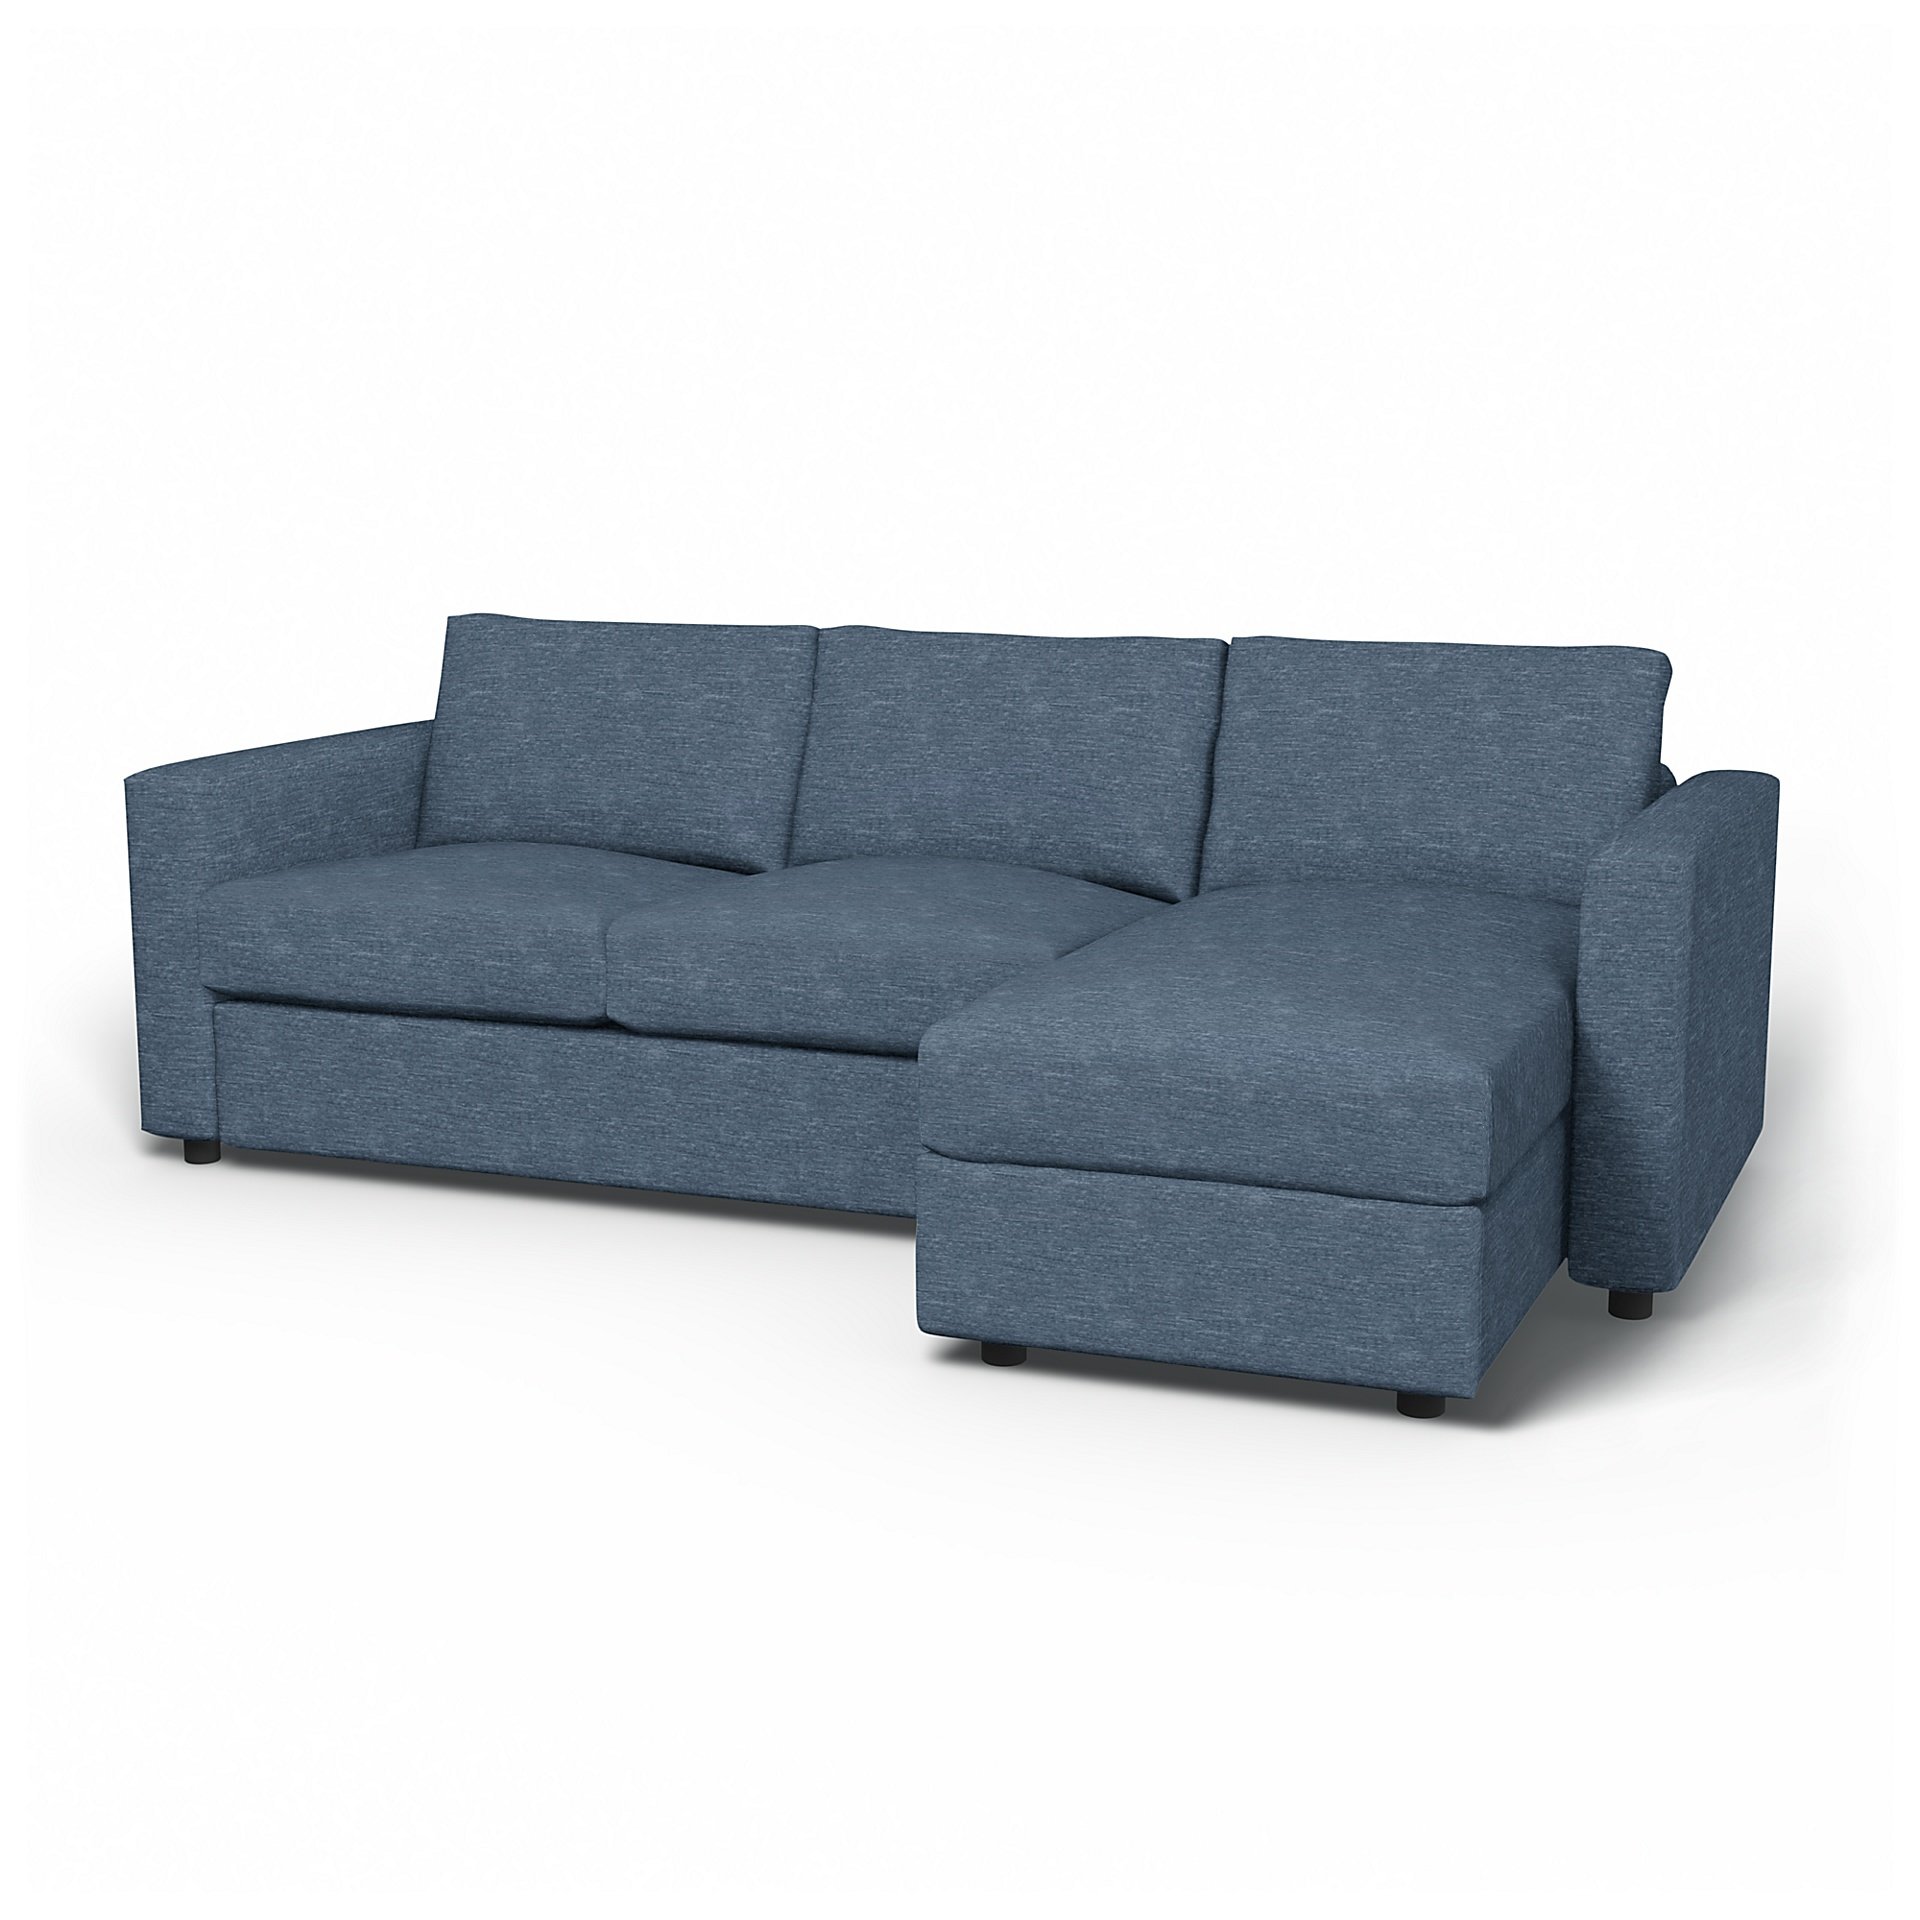 IKEA - Vimle 2 Seater Sofa with Chaise Cover, Mineral Blue, Velvet - Bemz